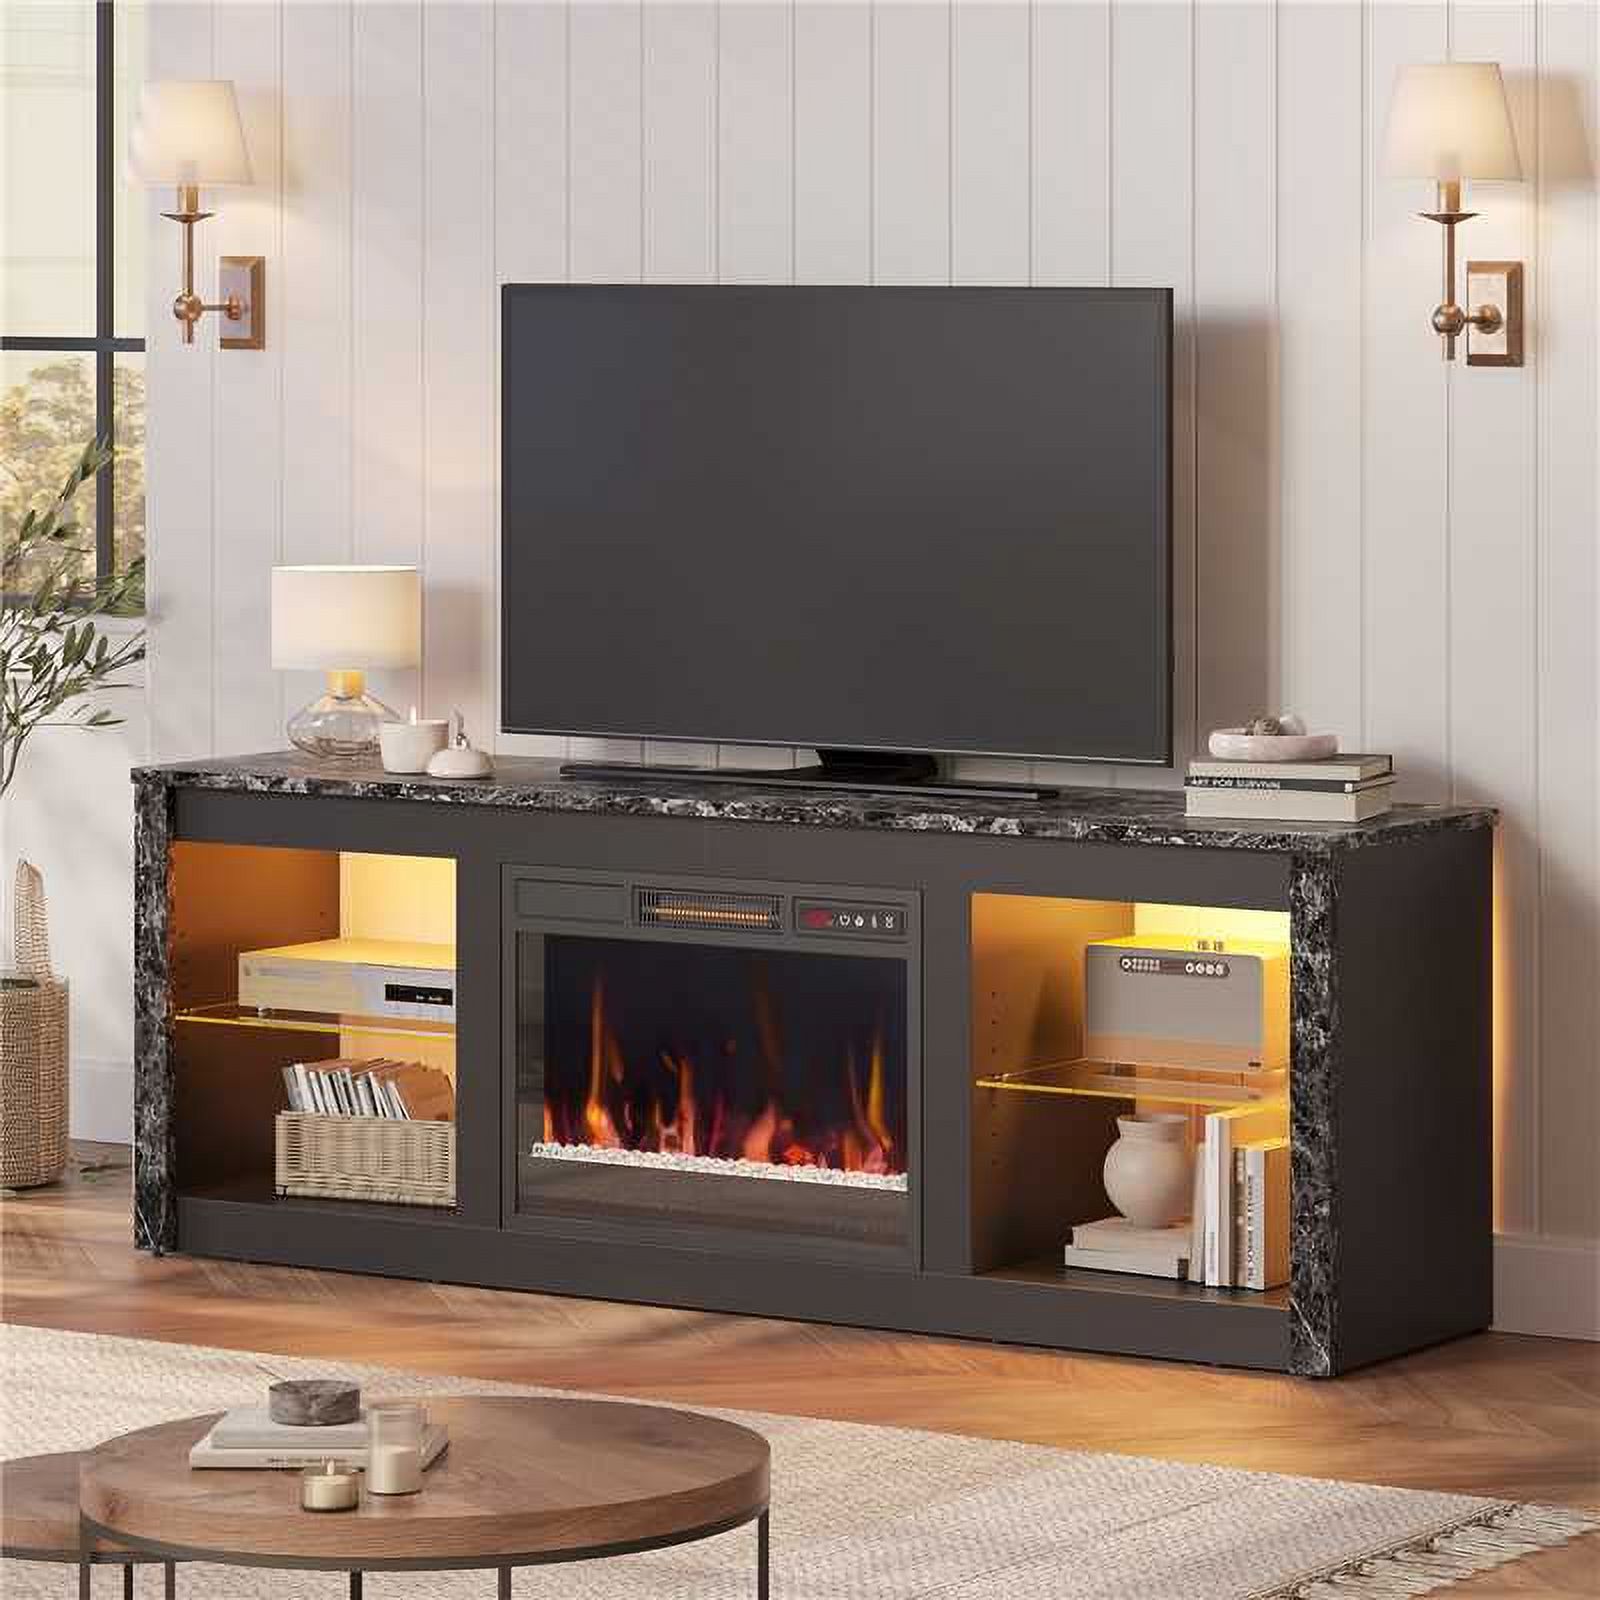 Bestier Modern Electric 7 Color LED Fireplace TV Stand for TVs up to 70", Black Marble - image 1 of 15